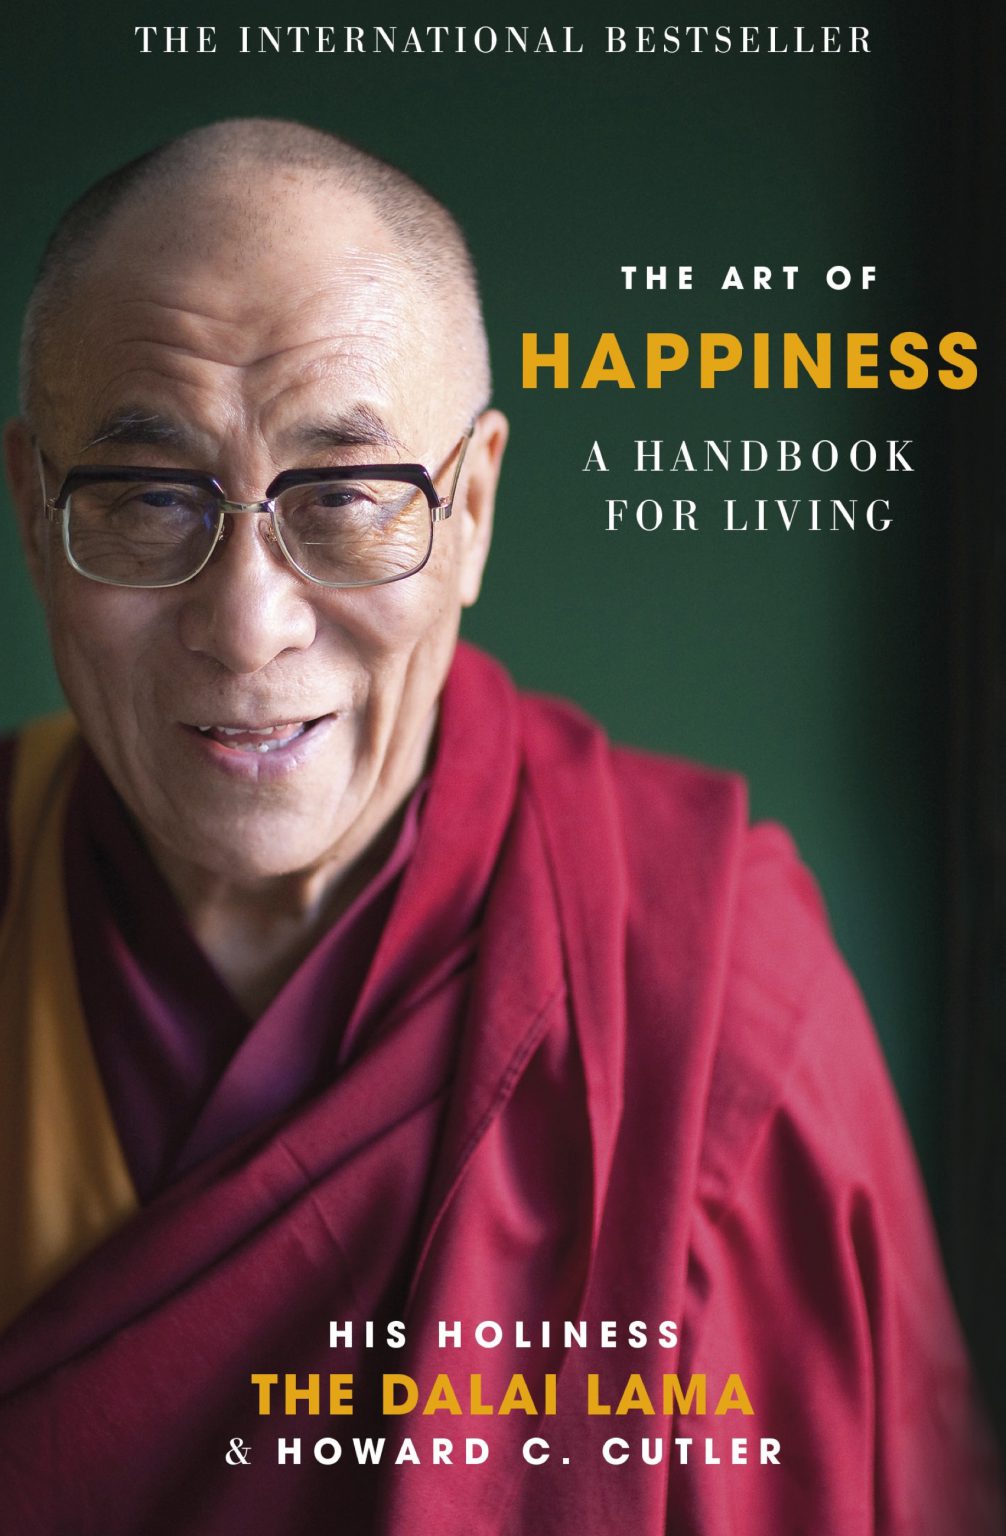 the art of happiness book club